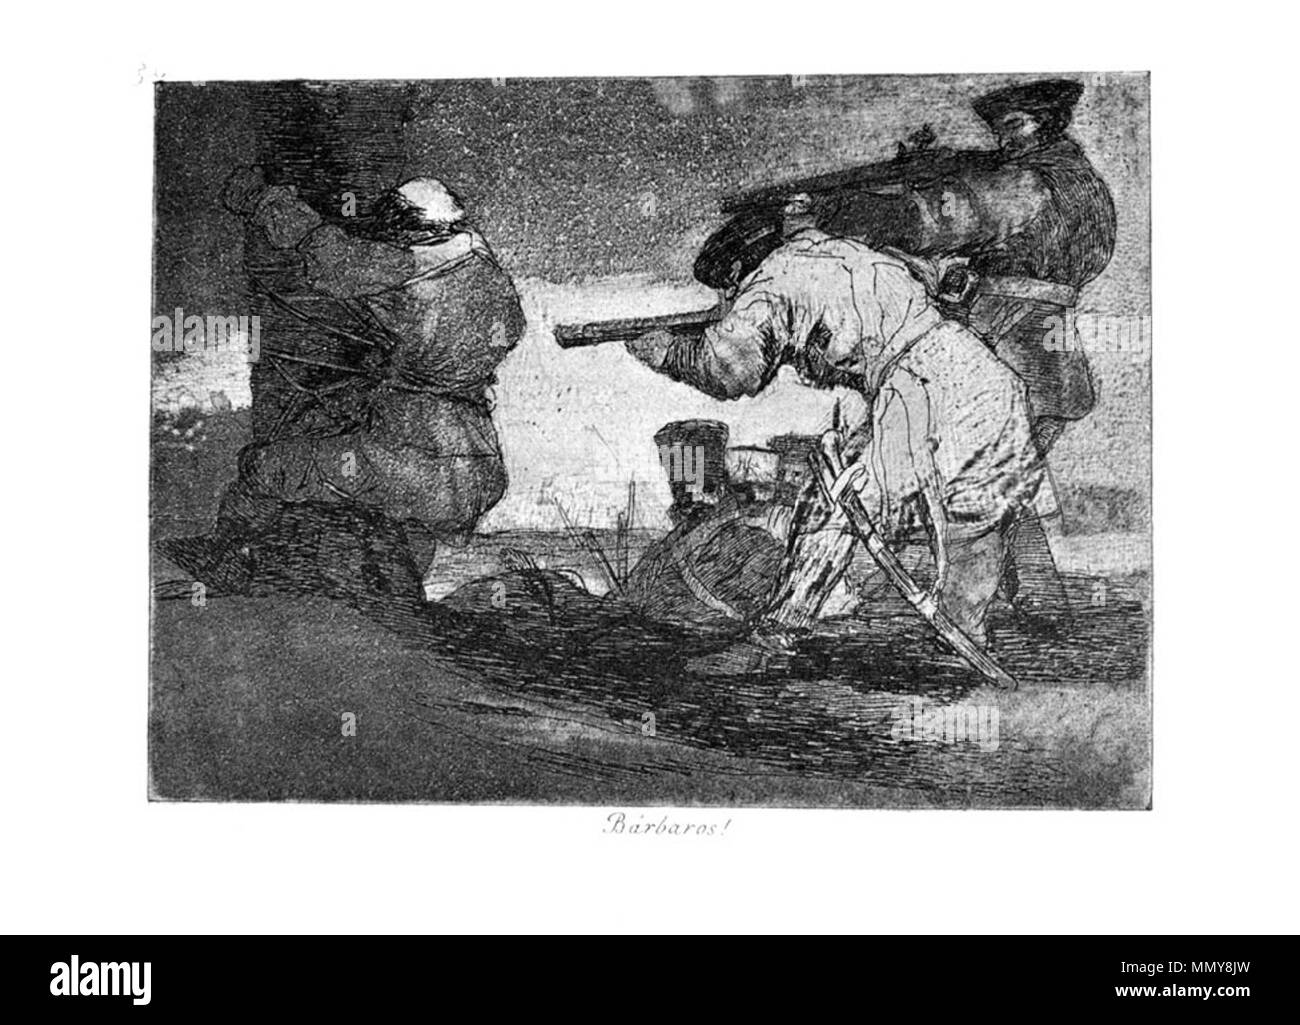 . Los Desatres de la Guerra is a set of 80 aquatint prints created by Francisco Goya in the 1810s. Plate 38: Bárbaros! (Barbarians! )  . 1810s.   Francisco Goya  (1746–1828)      Alternative names Francisco Goya Lucientes, Francisco de Goya y Lucientes, Francisco José Goya Lucientes  Description Spanish painter, printmaker, lithographer, engraver and etcher  Date of birth/death 30 March 1746 16 April 1828  Location of birth/death Fuendetodos Bordeaux  Work location Madrid, Zaragoza, Bordeaux  Authority control  : Q5432 VIAF:?54343141 ISNI:?0000 0001 2280 1608 ULAN:?500118936 LCCN:?n79003363 NL Stock Photo